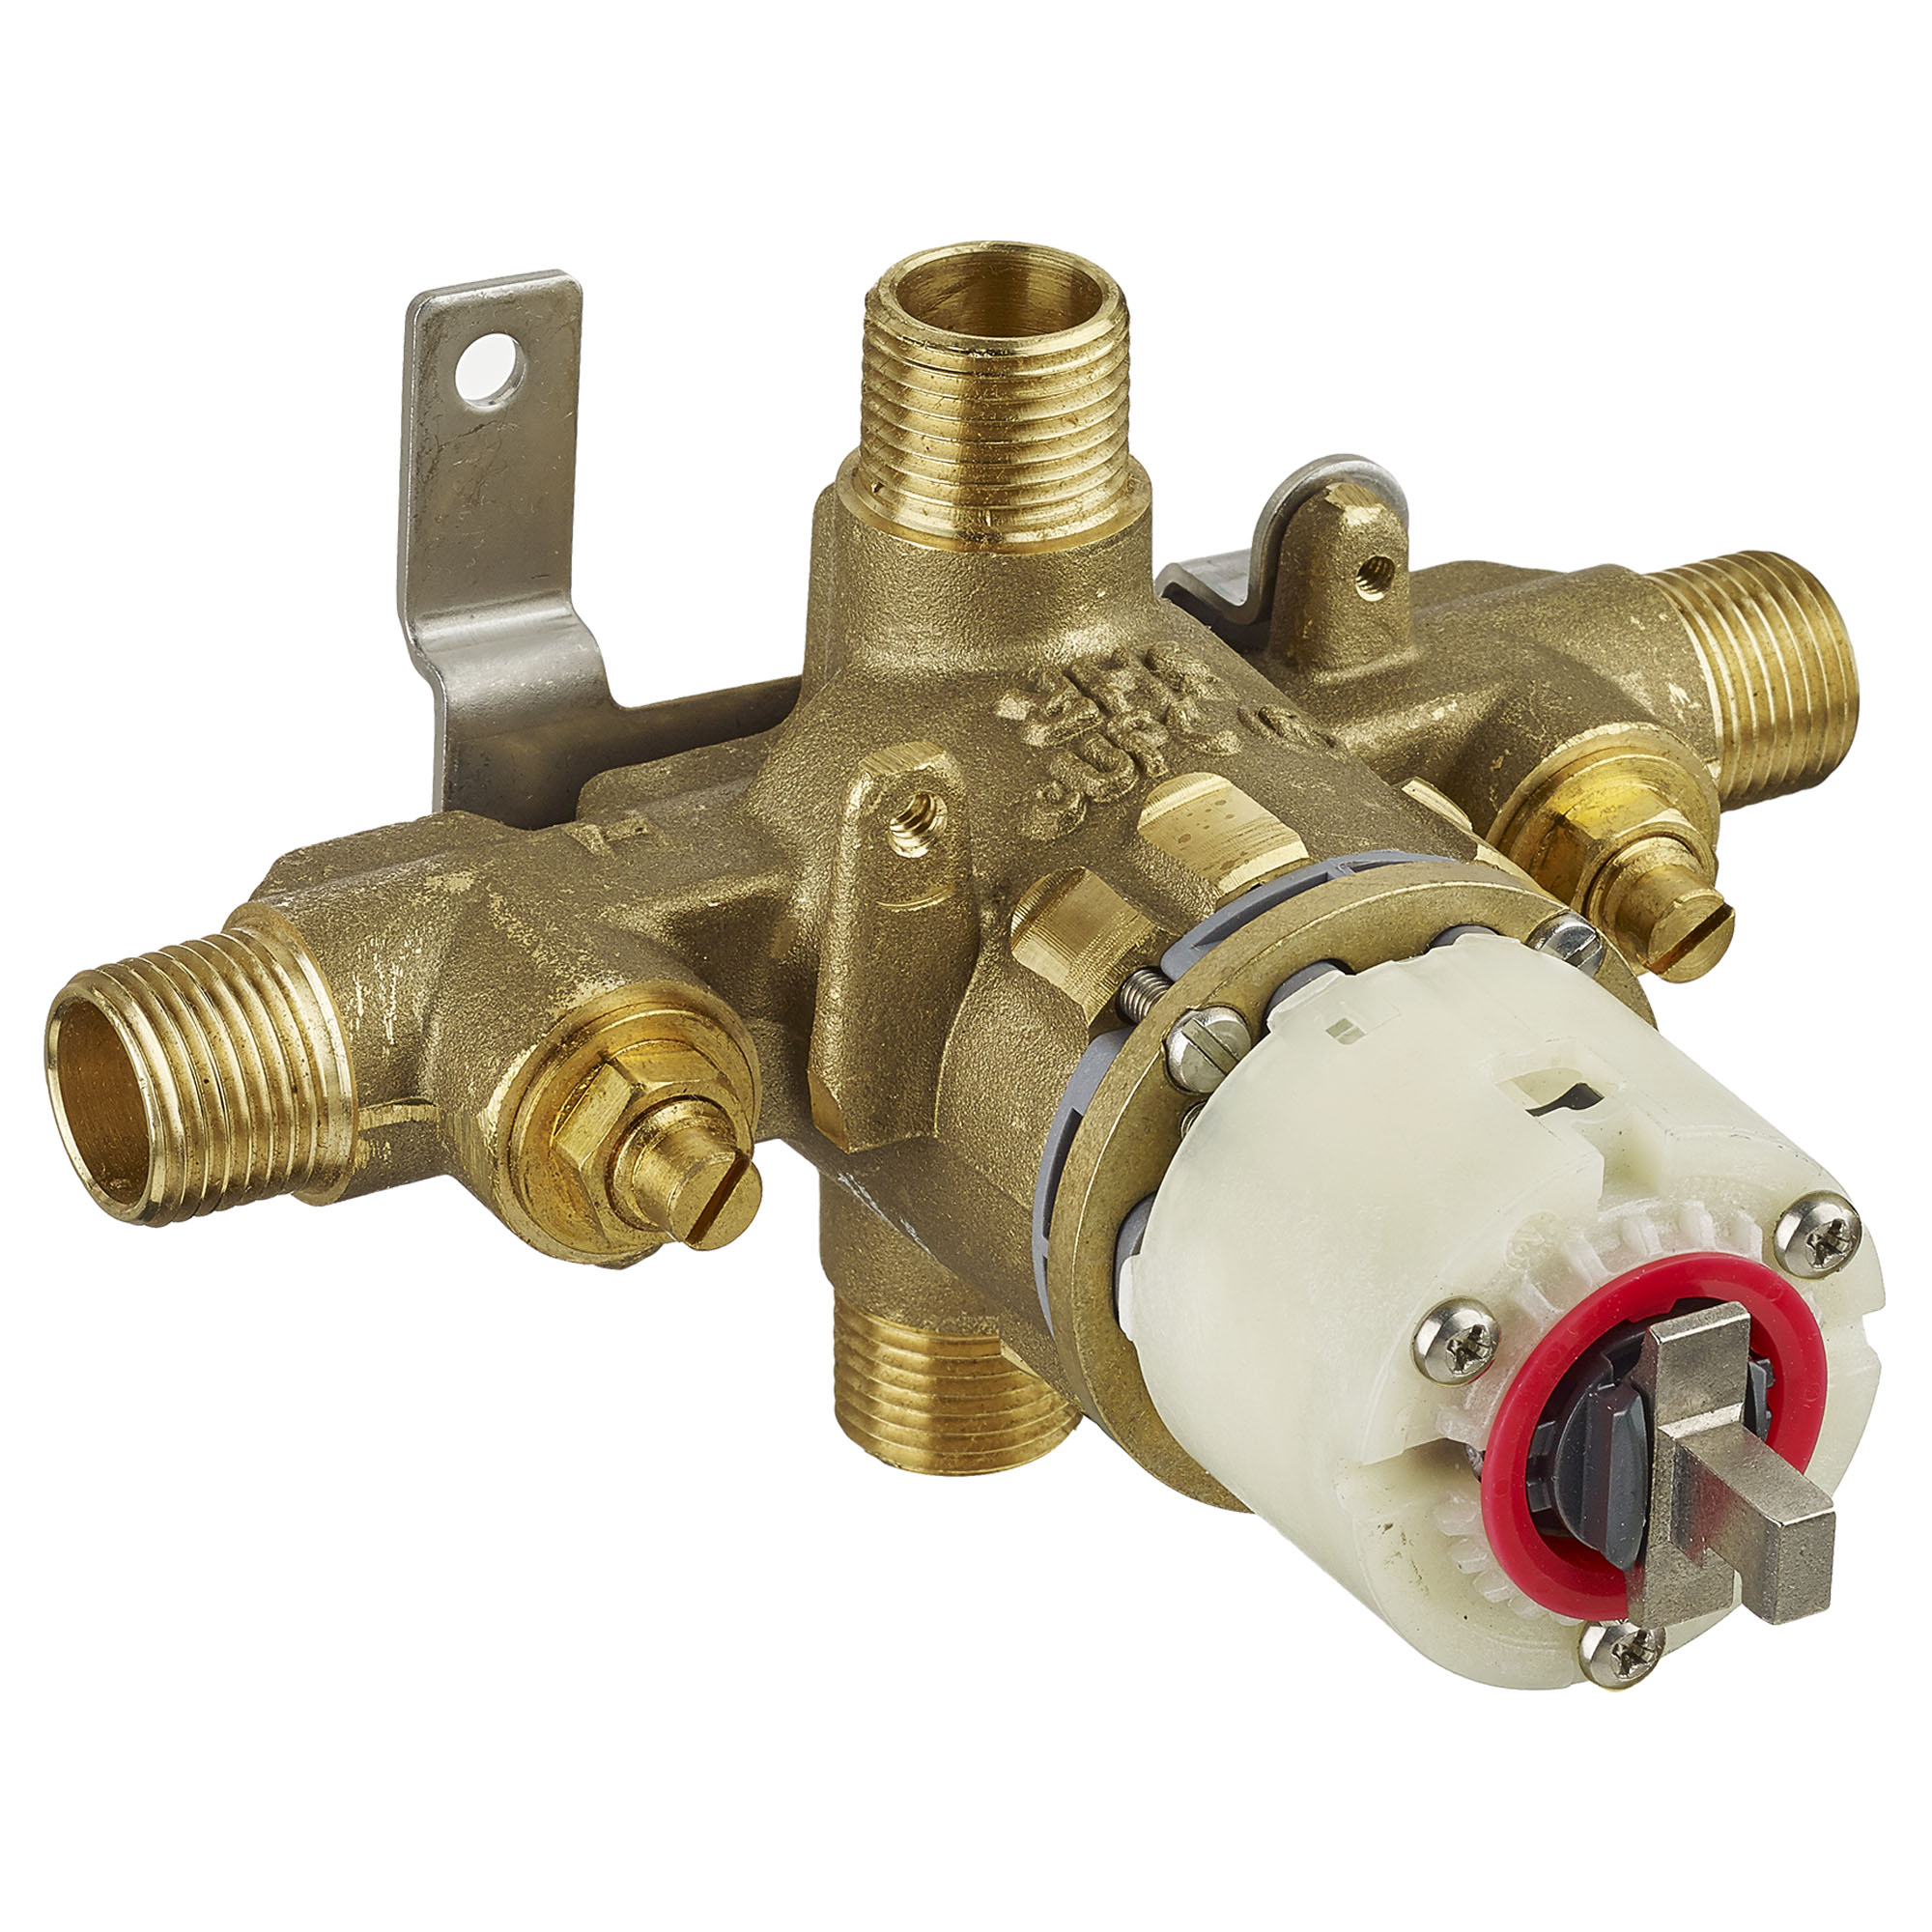 Pressure Balance Temperature Control Rough Valve Only 1/2" Universal Inlets/Outlets w/Screwdriver Stops